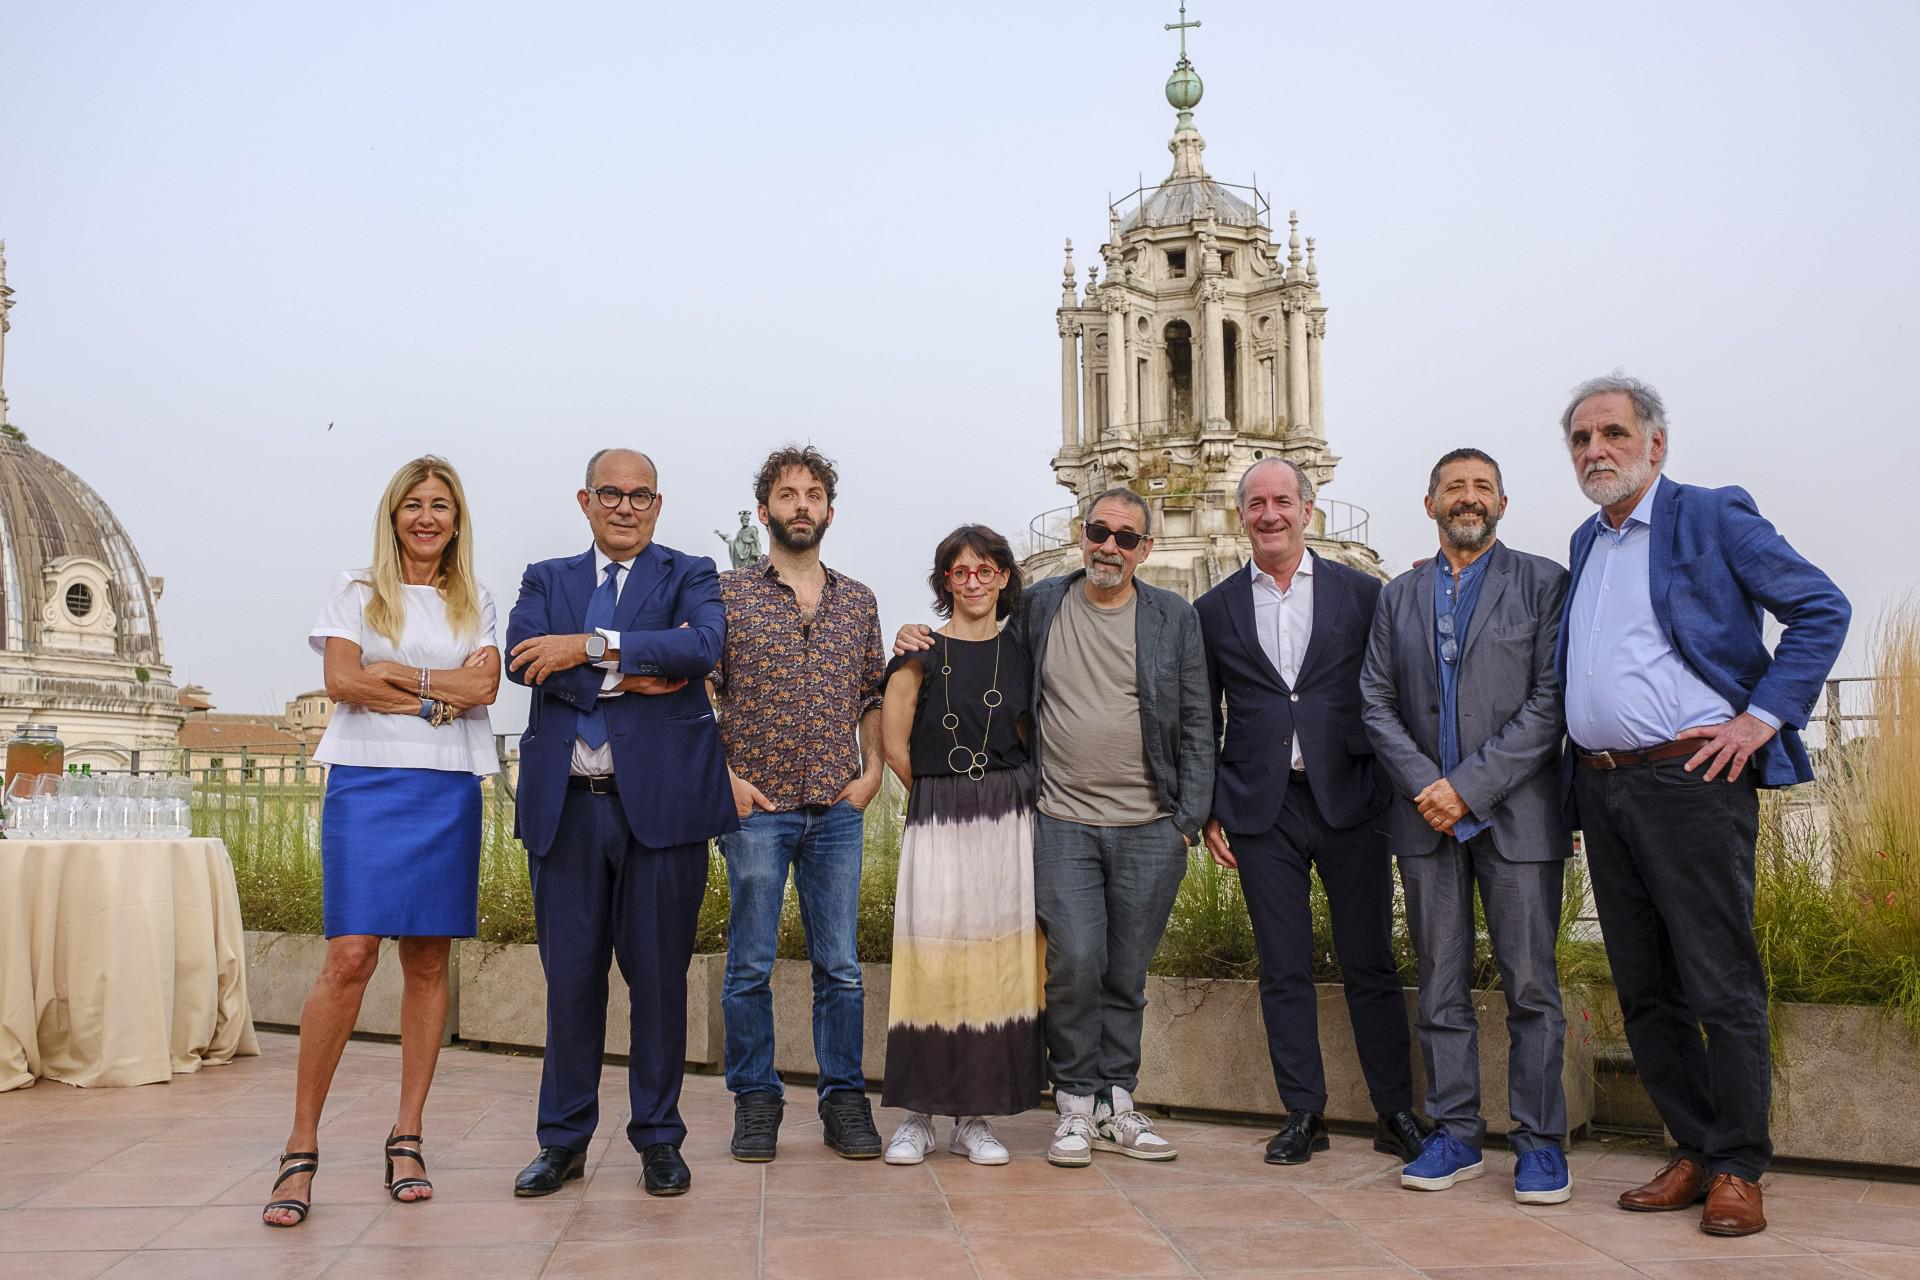 Summer on tour for the finalists of the Campiello Prize